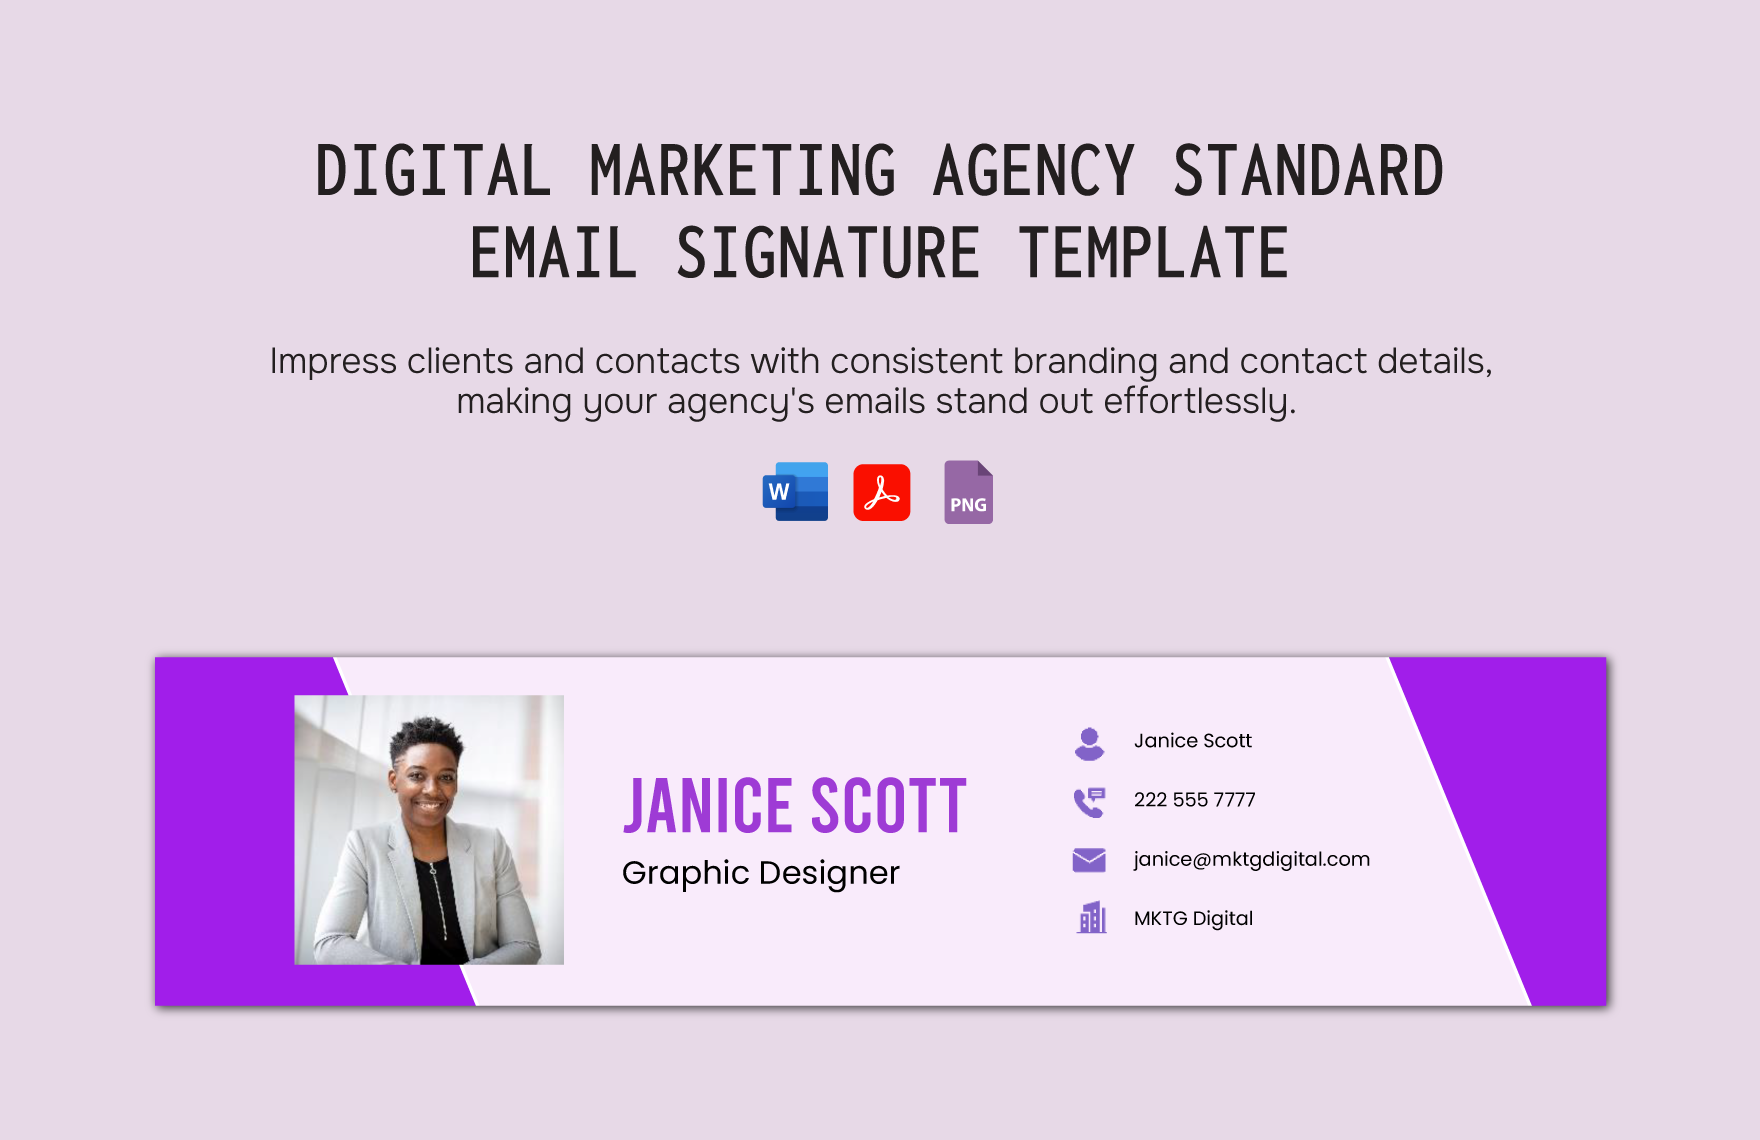 Digital Marketing Agency Standard Email Signature Template